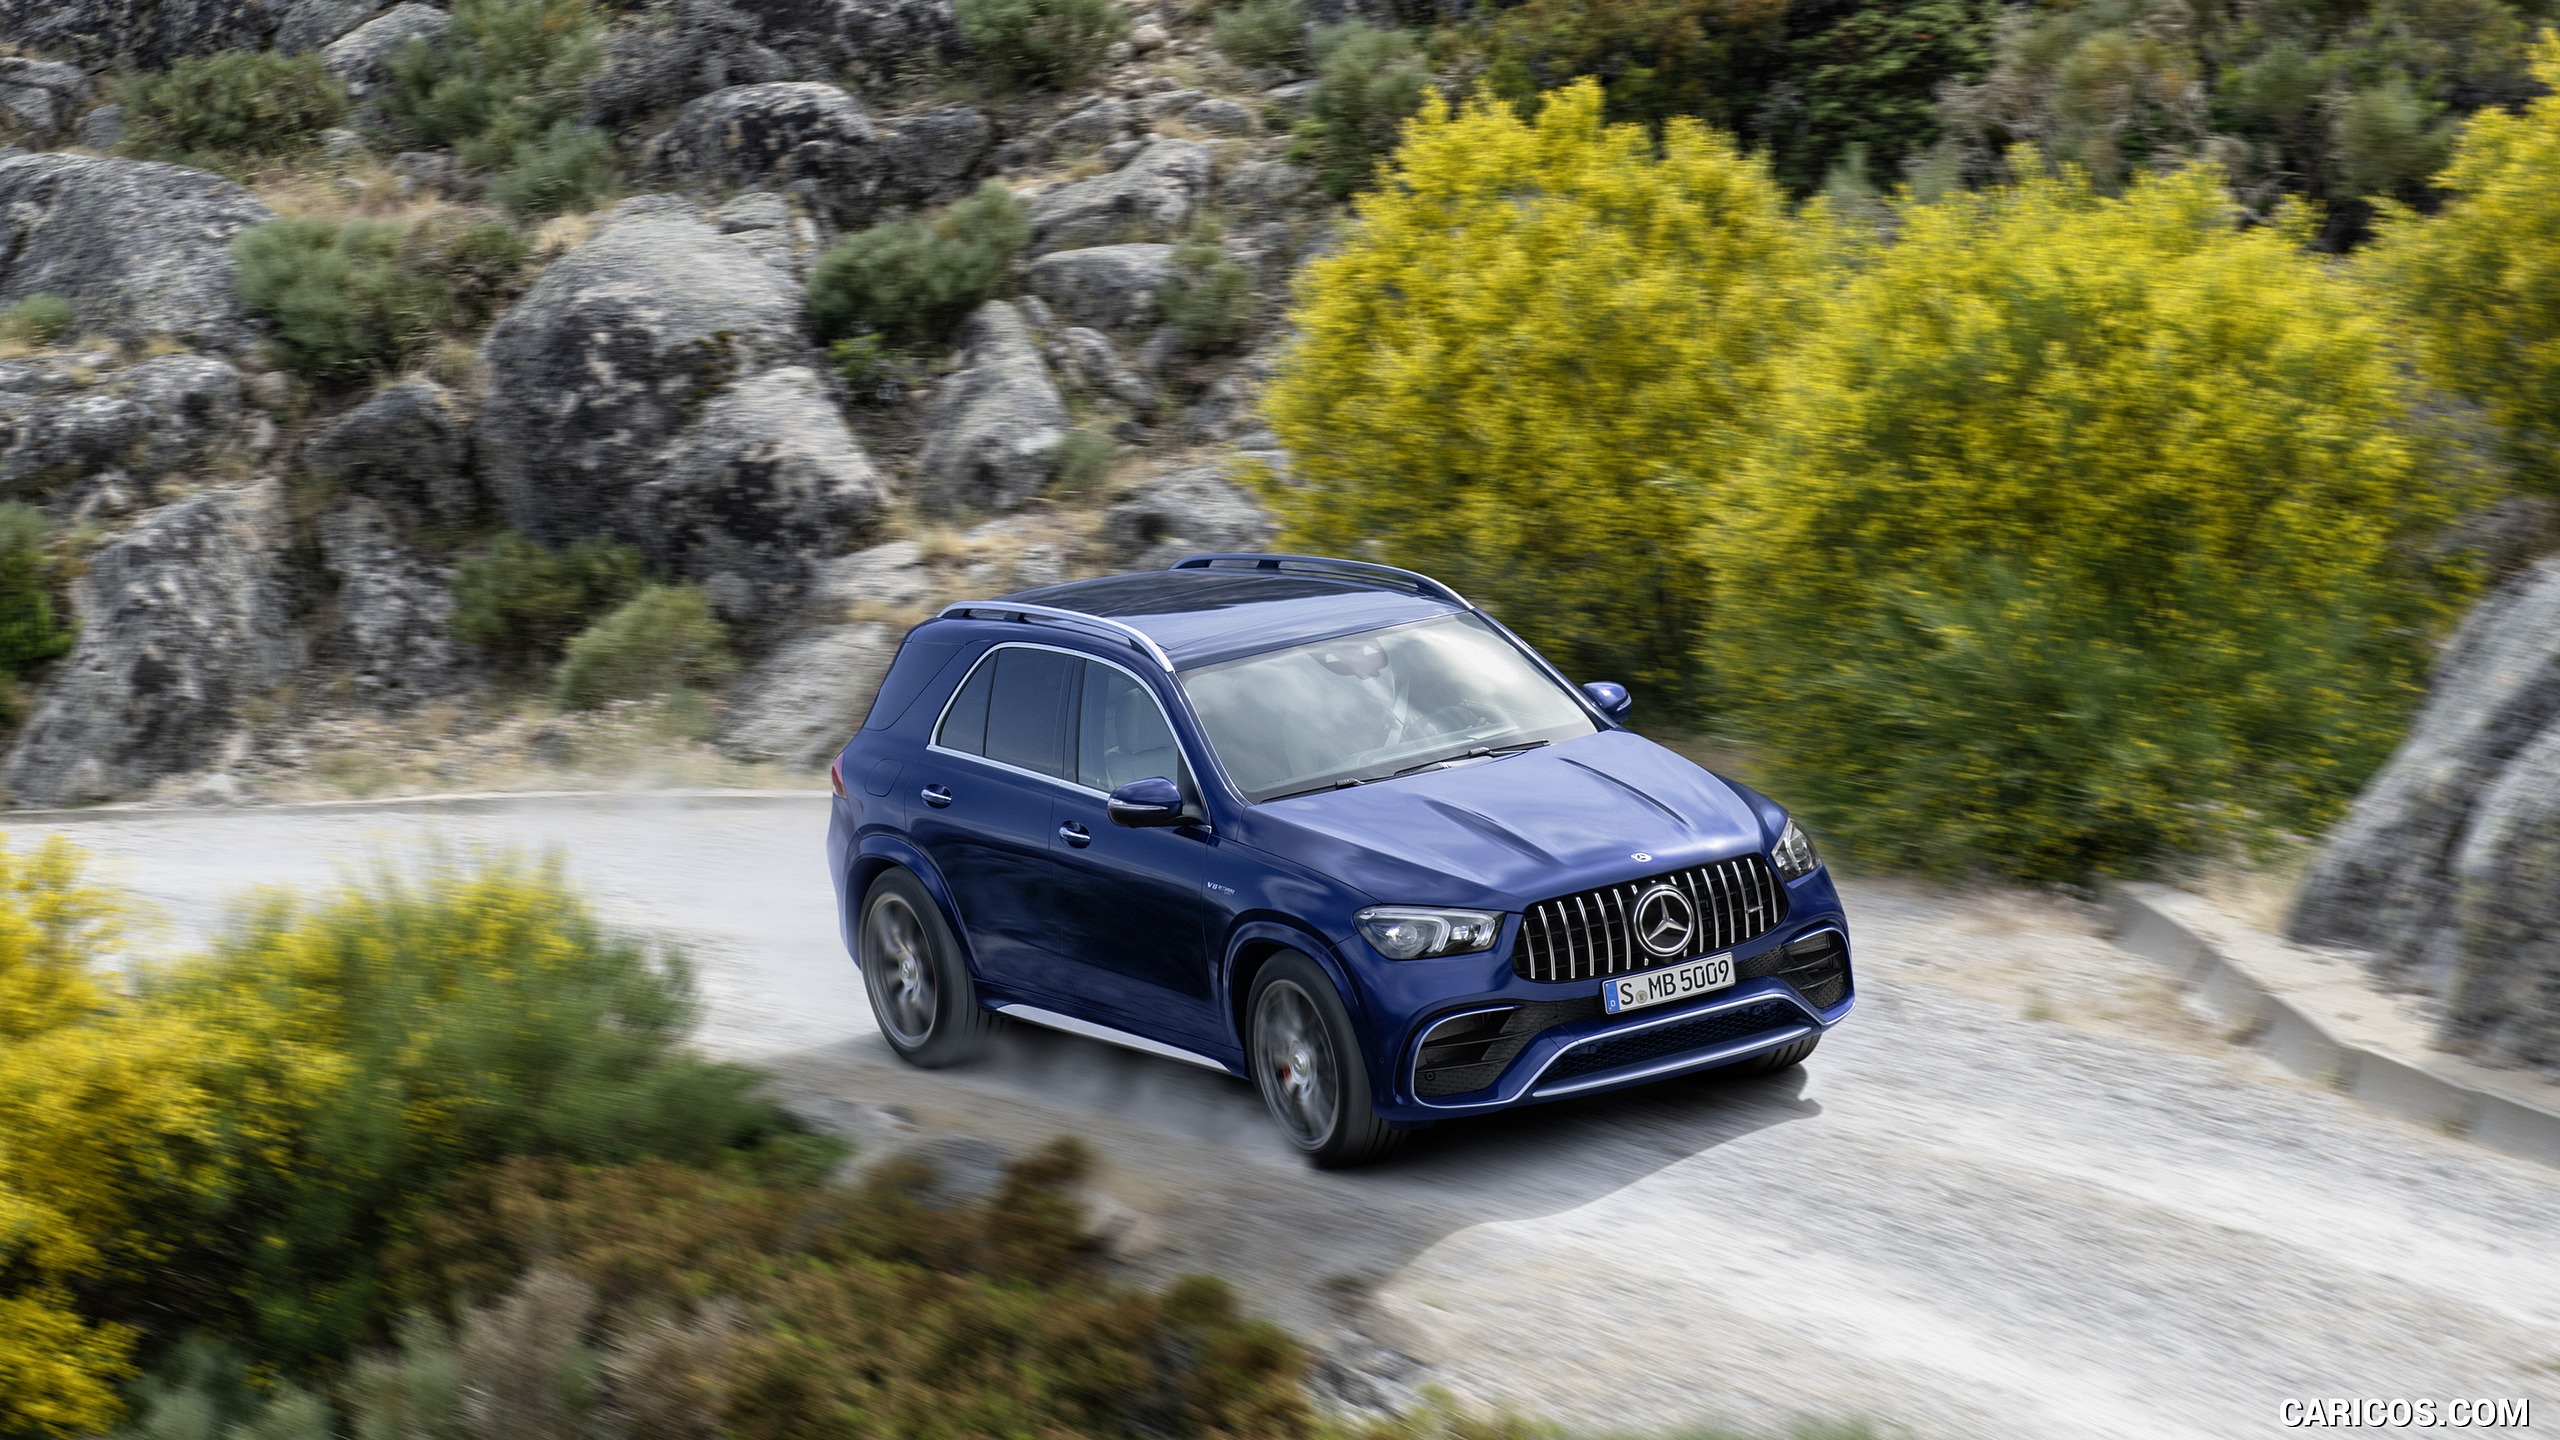 2021 Mercedes-AMG GLE 63 S 4MATIC - Front Three-Quarter, #10 of 187